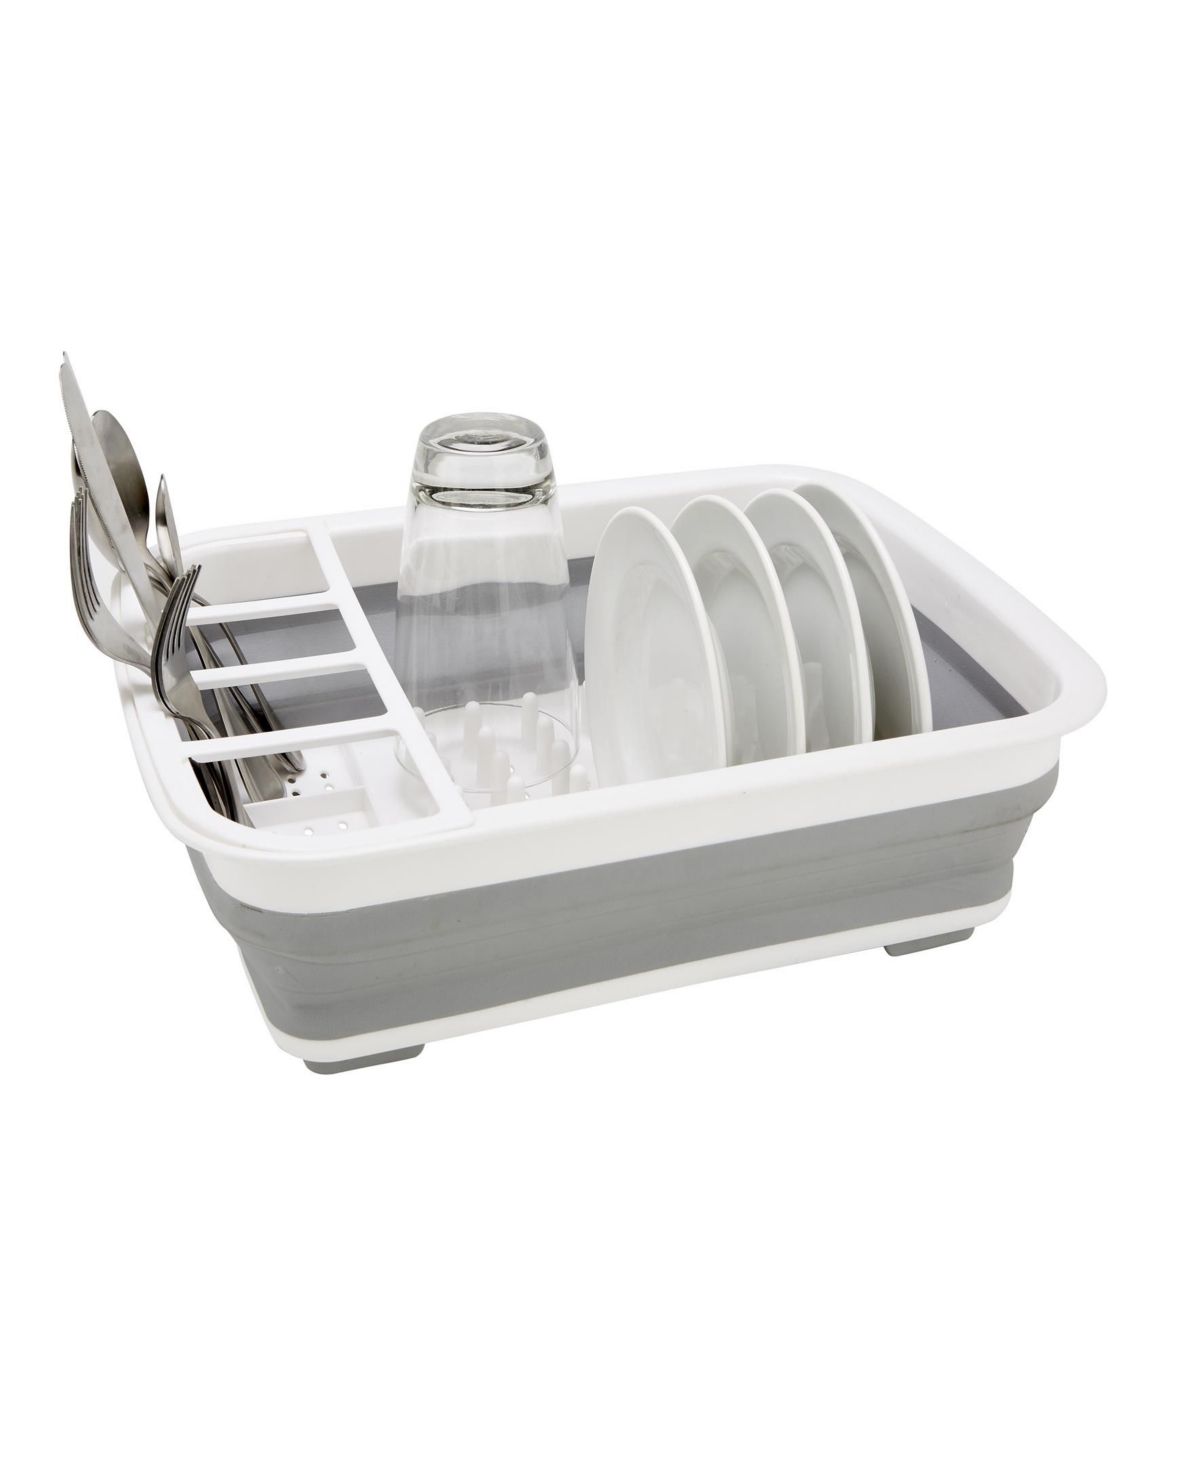 Collapsible Dish Rack - White